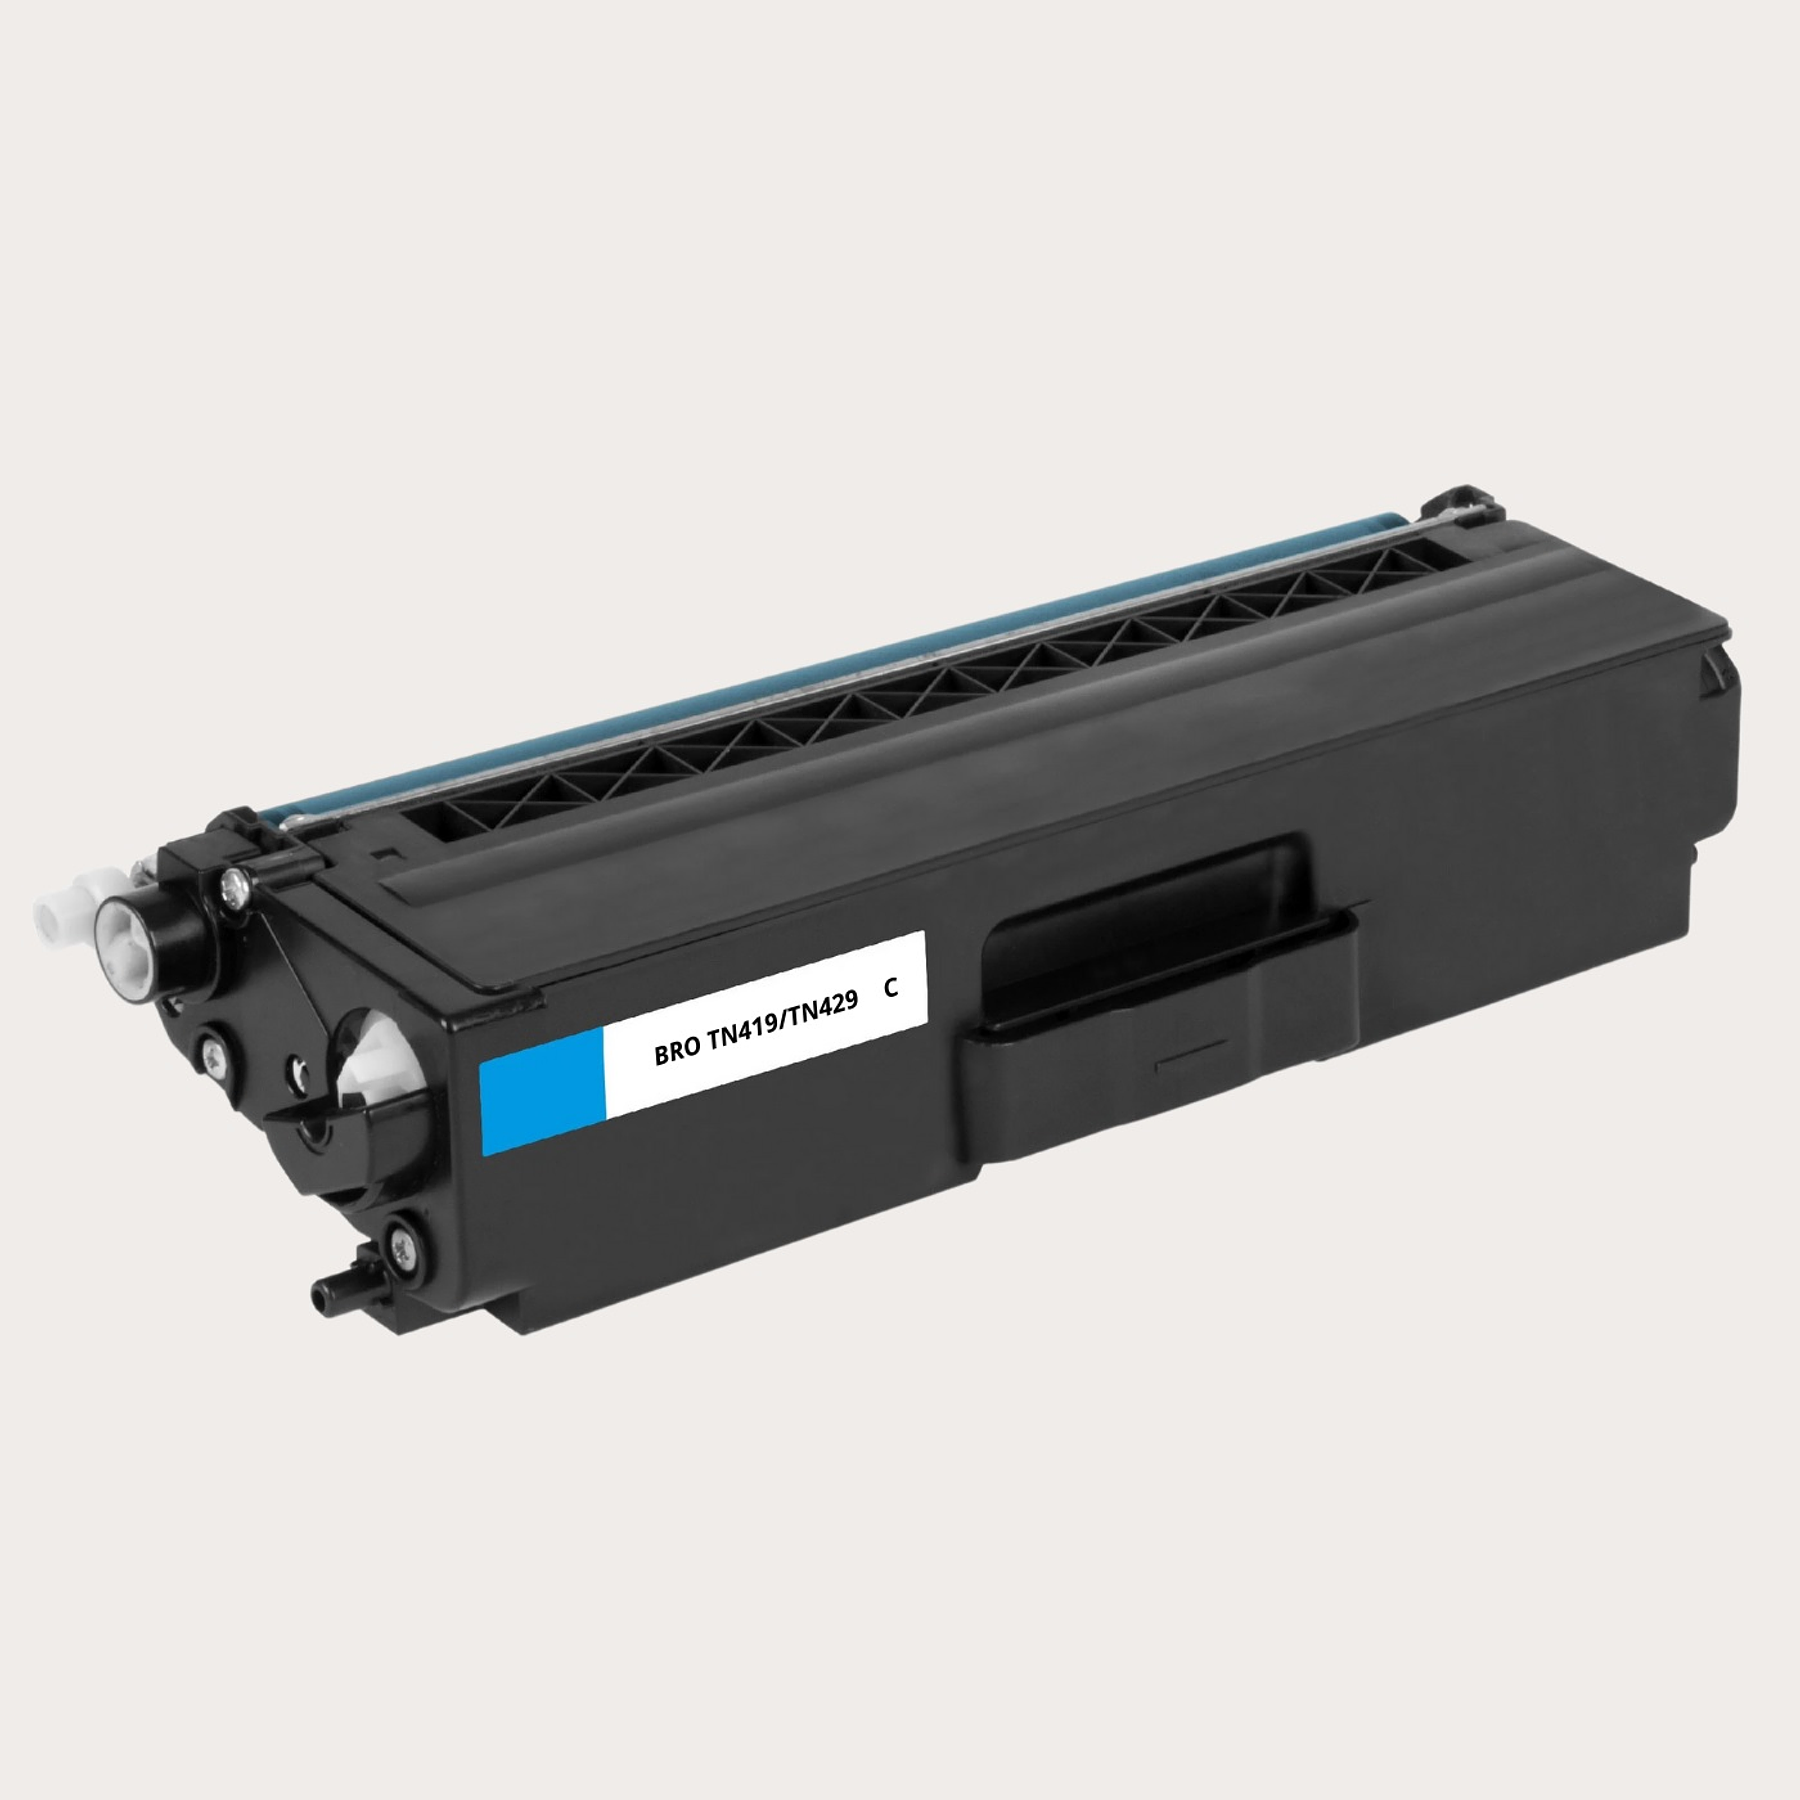 Toner Tn-419 Cian Compatible con Brother MFC-8610 MFC-9570 HL-8360